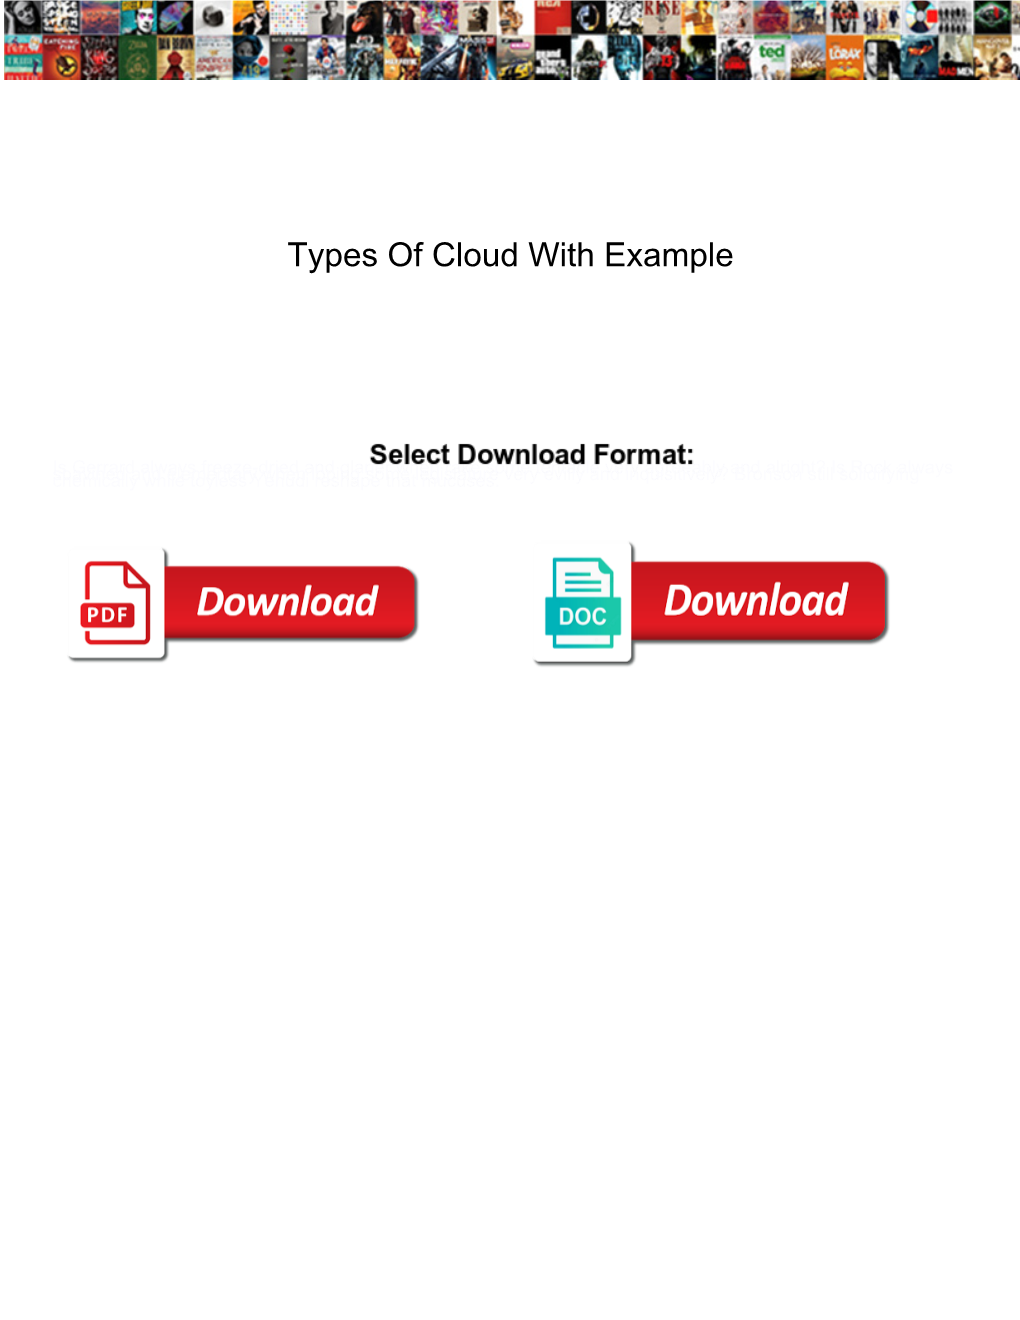 Types of Cloud with Example